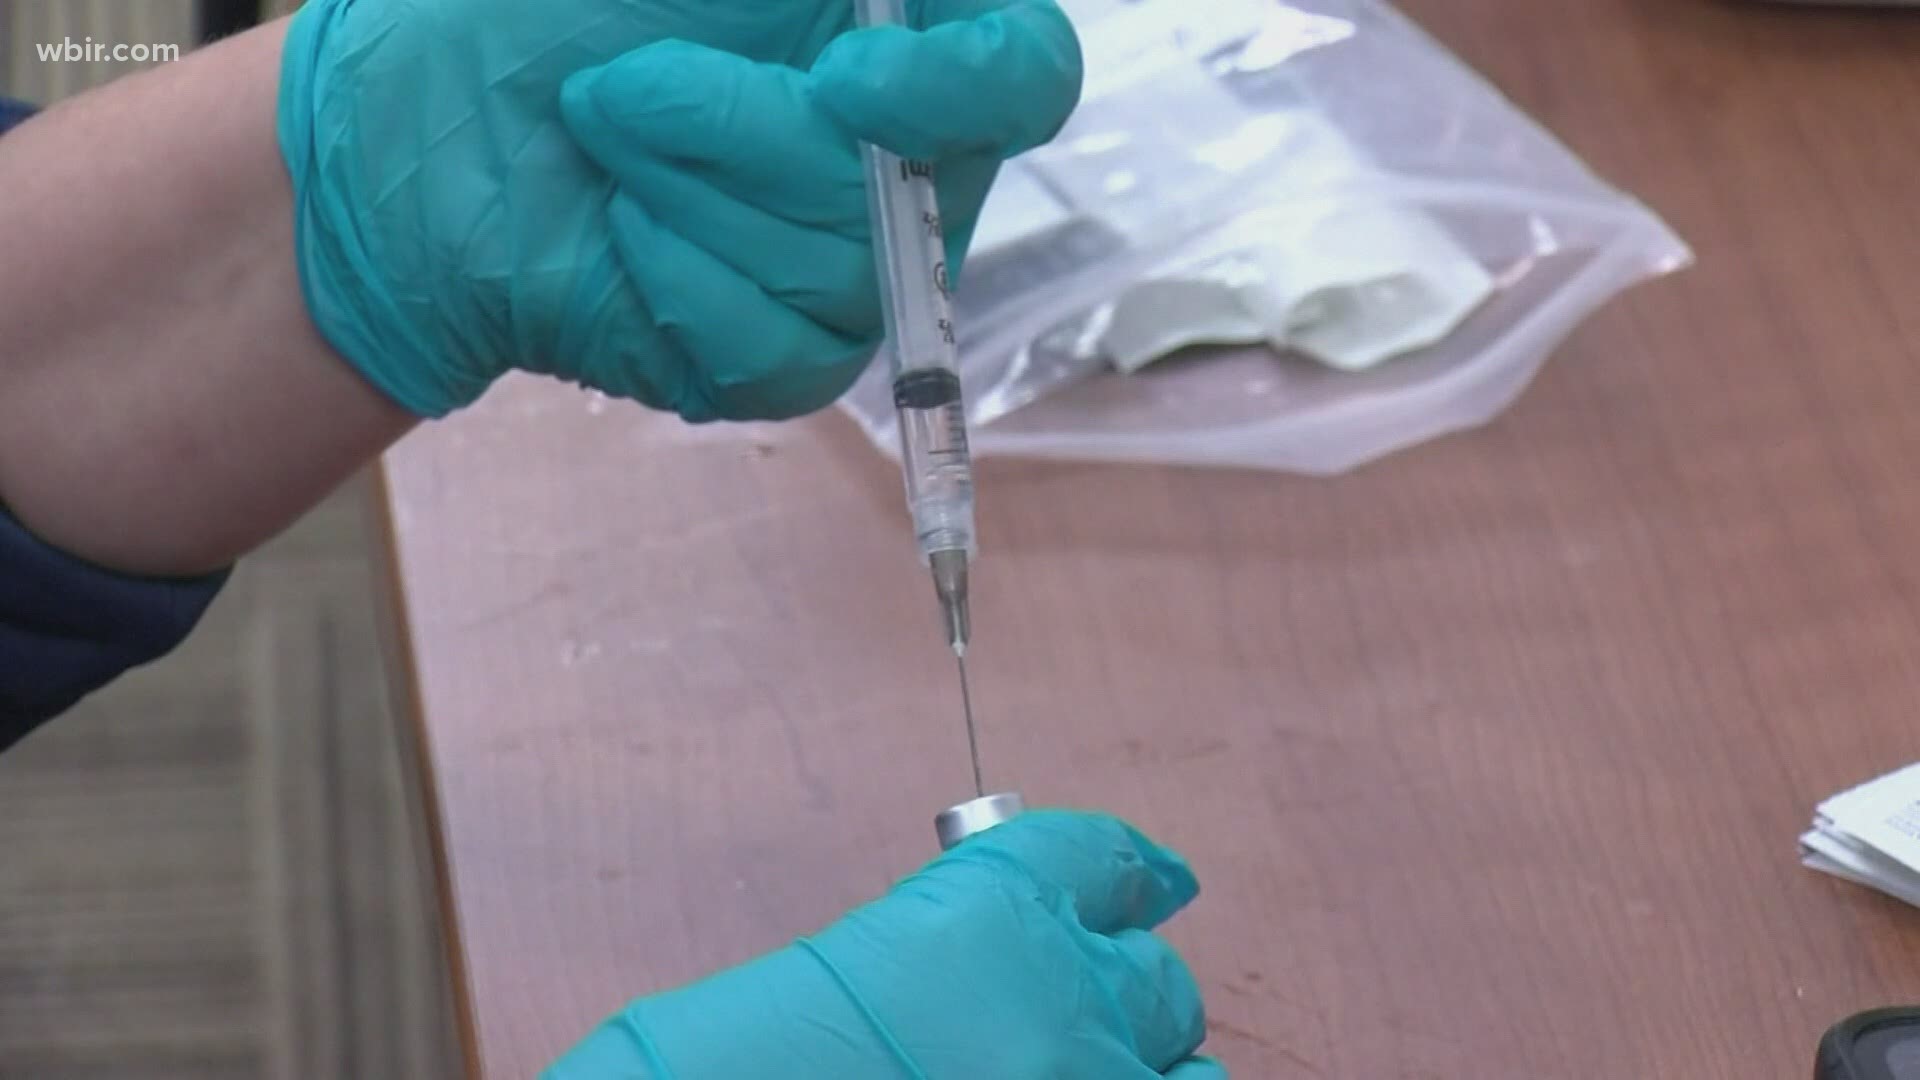 Even after people get the COVID-19 vaccine, doctors say there's still a chance they could be infected.